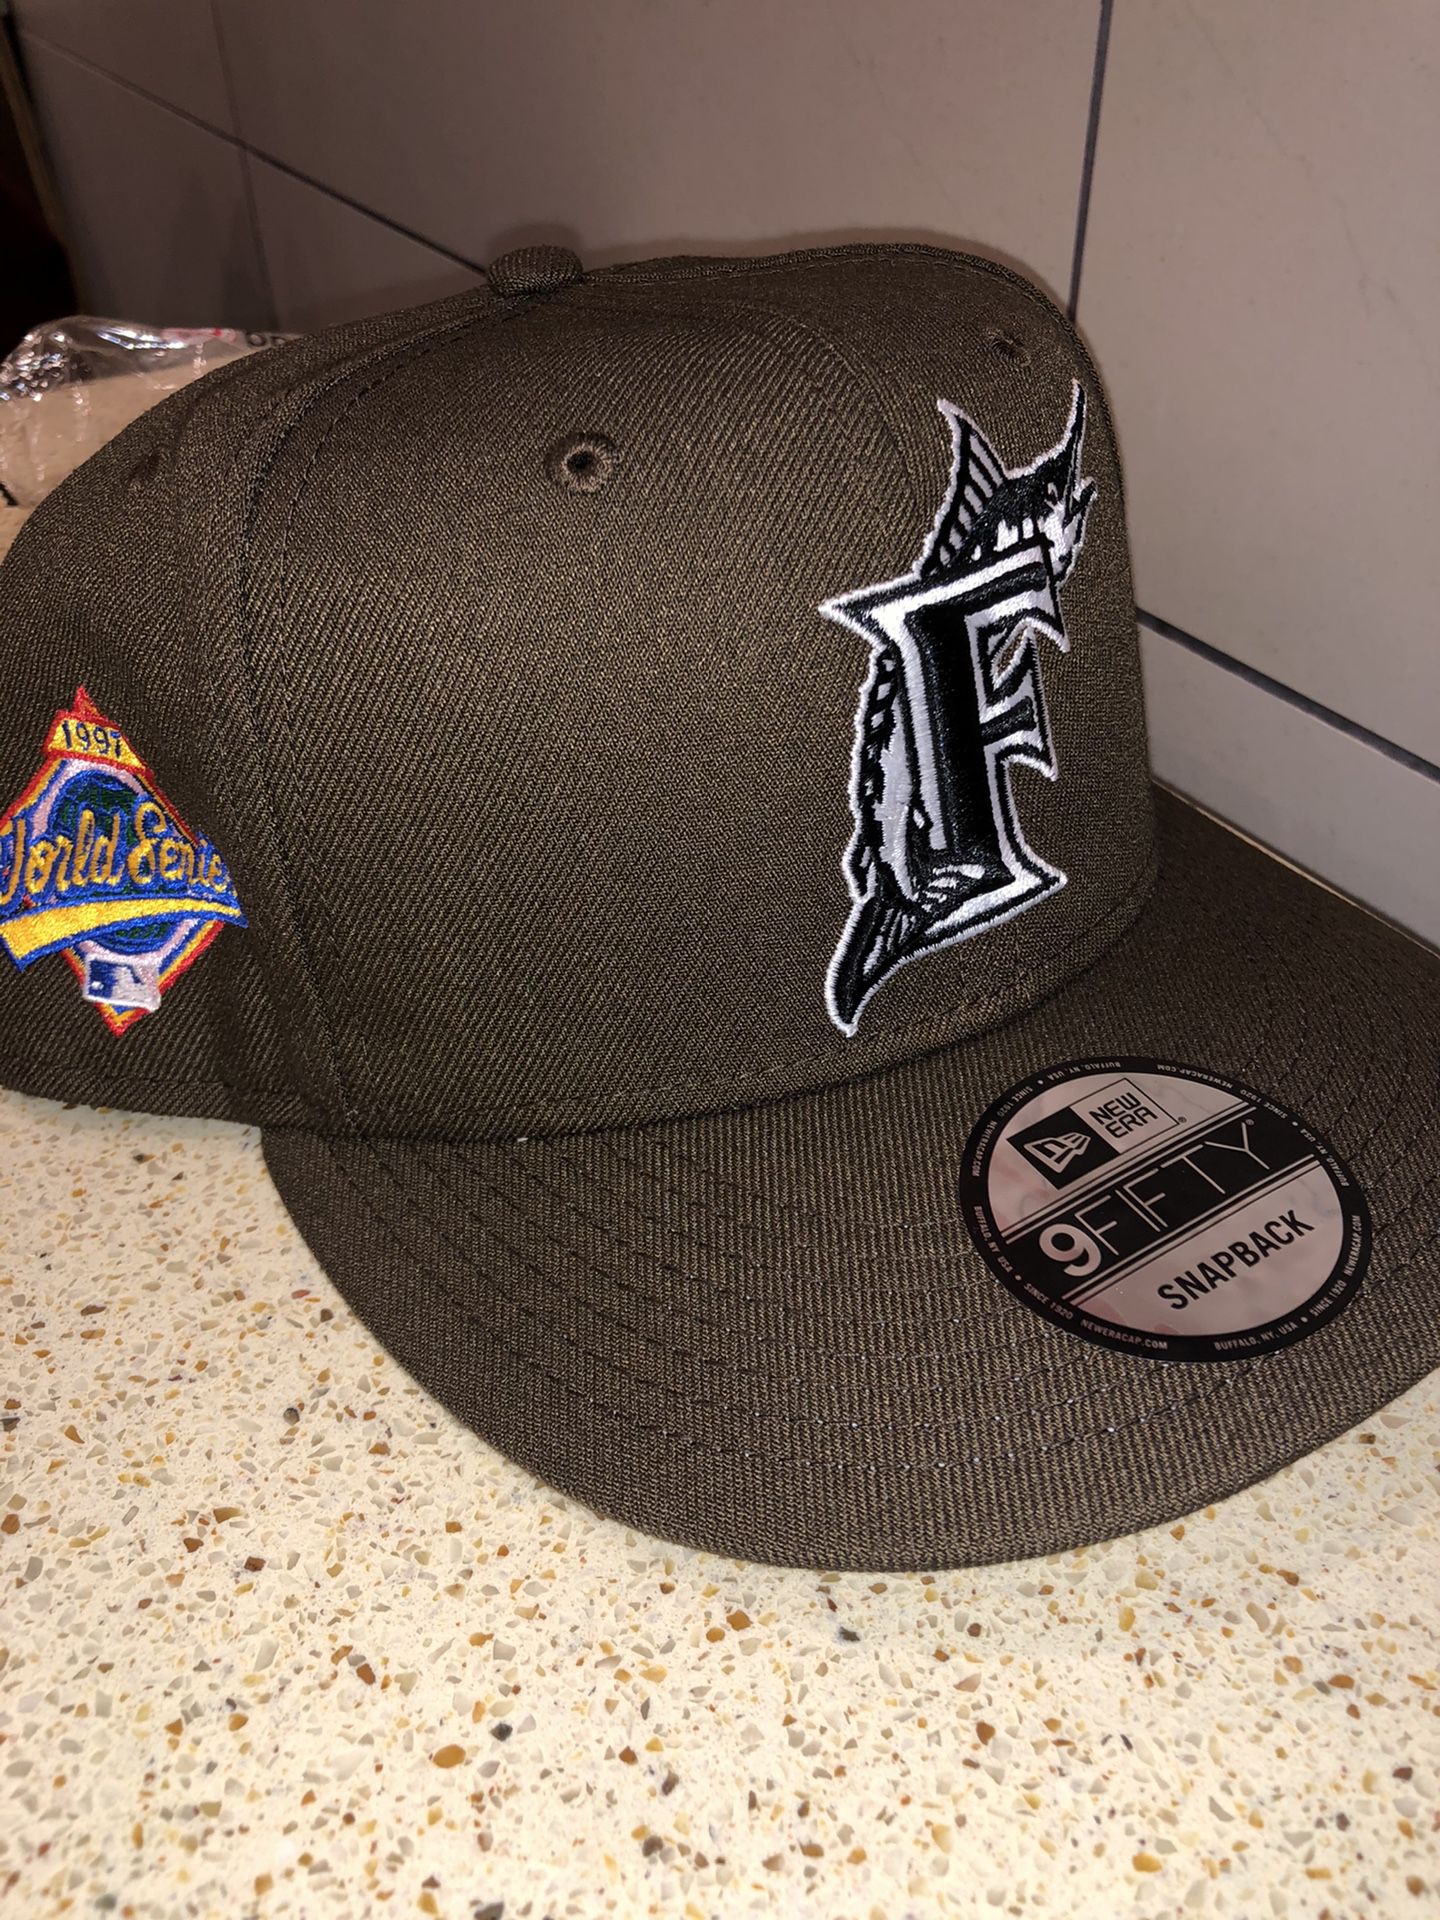 MOCHA FLORIDA MARLINS 1997 WORLD SERIES PINK BRIM SNAPBACK HAT CLUB for  Sale in Vacaville, CA - OfferUp